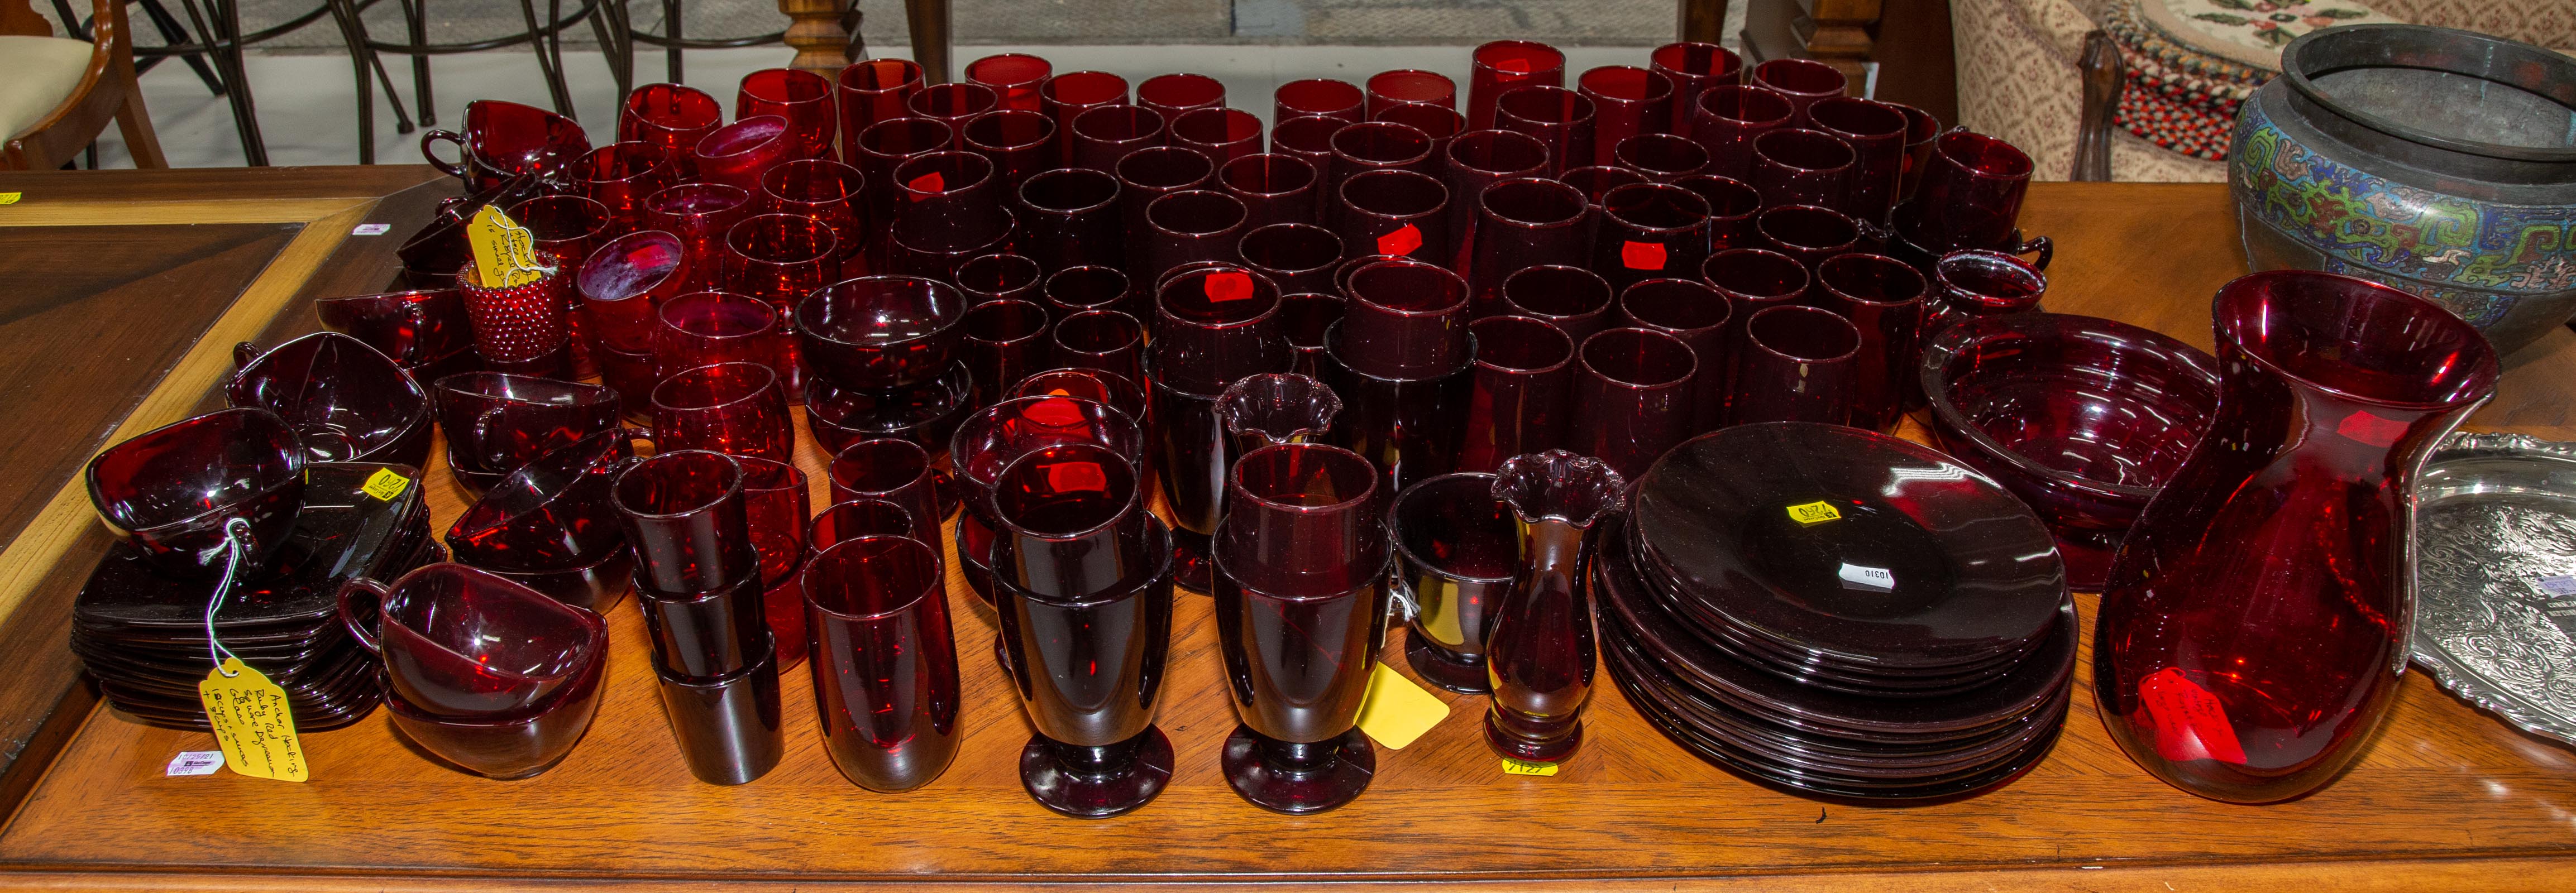 A LARGE COLLECTION OF RED GLASSWARE